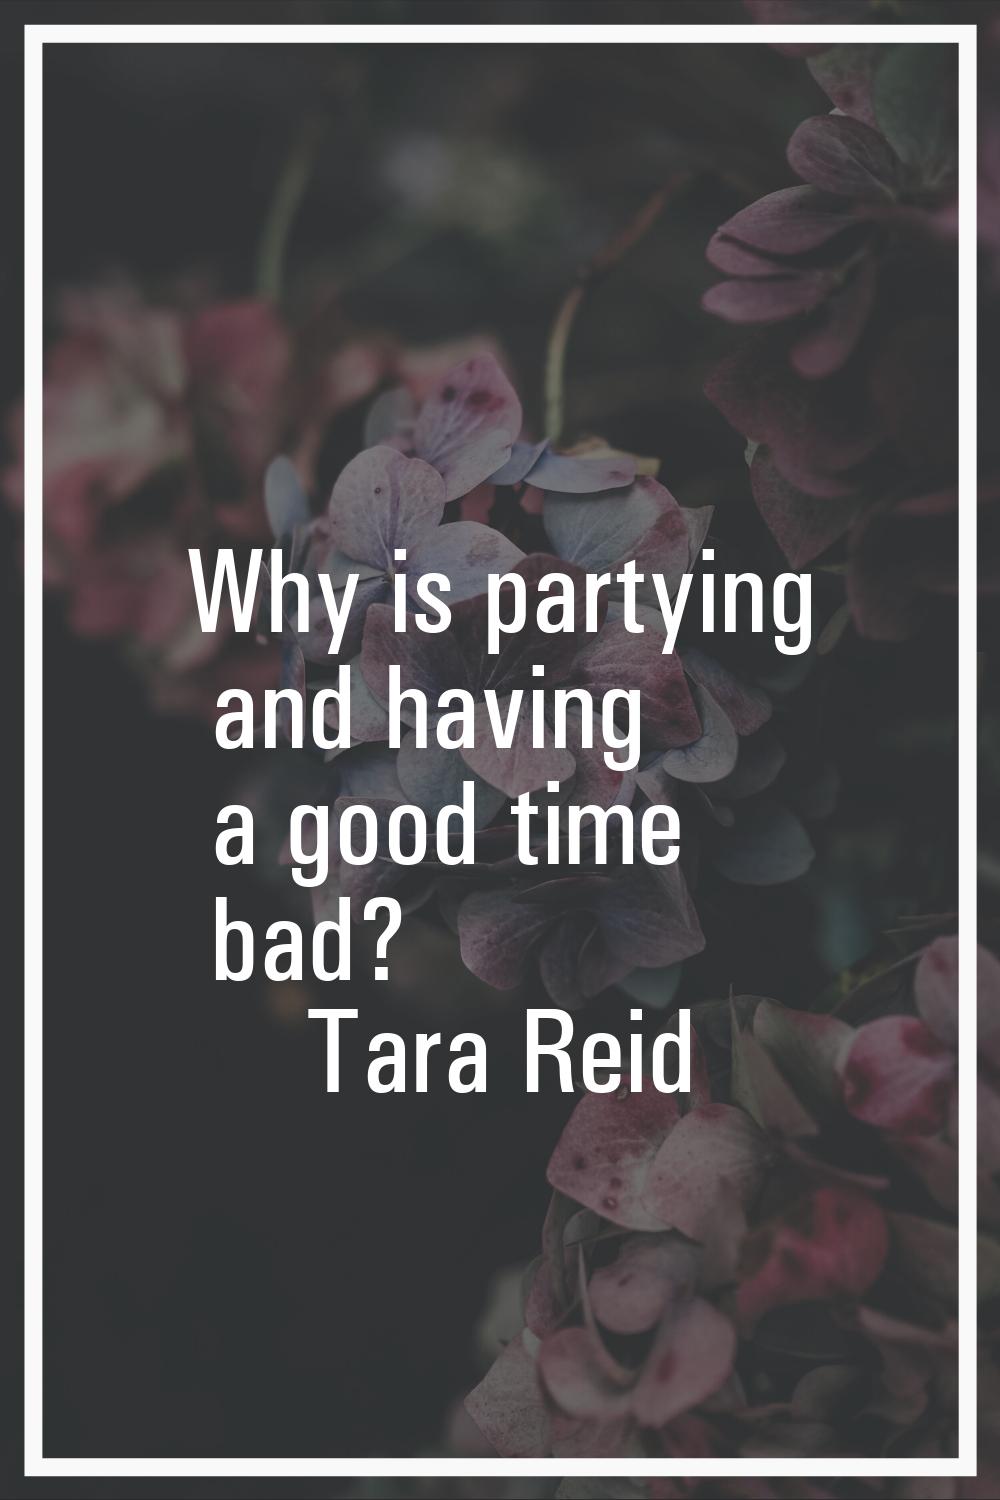 Why is partying and having a good time bad?